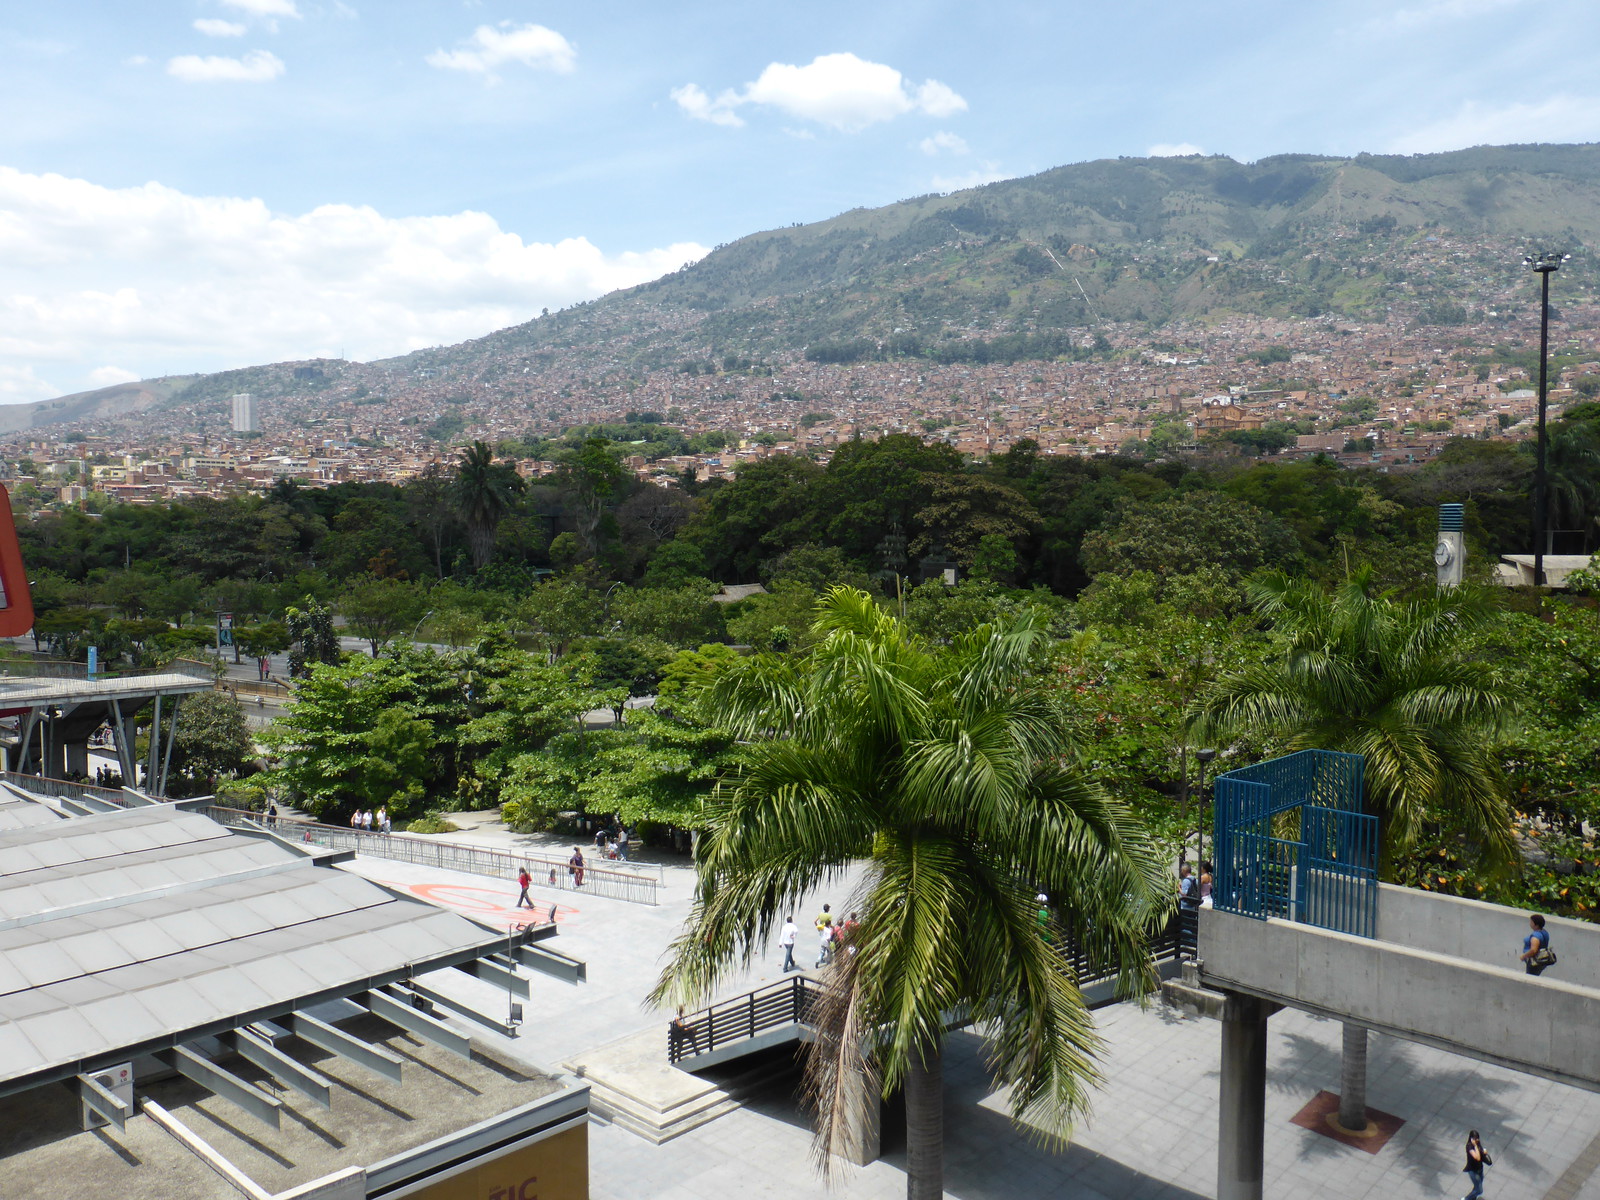 Medellín is in a steep-sided valley